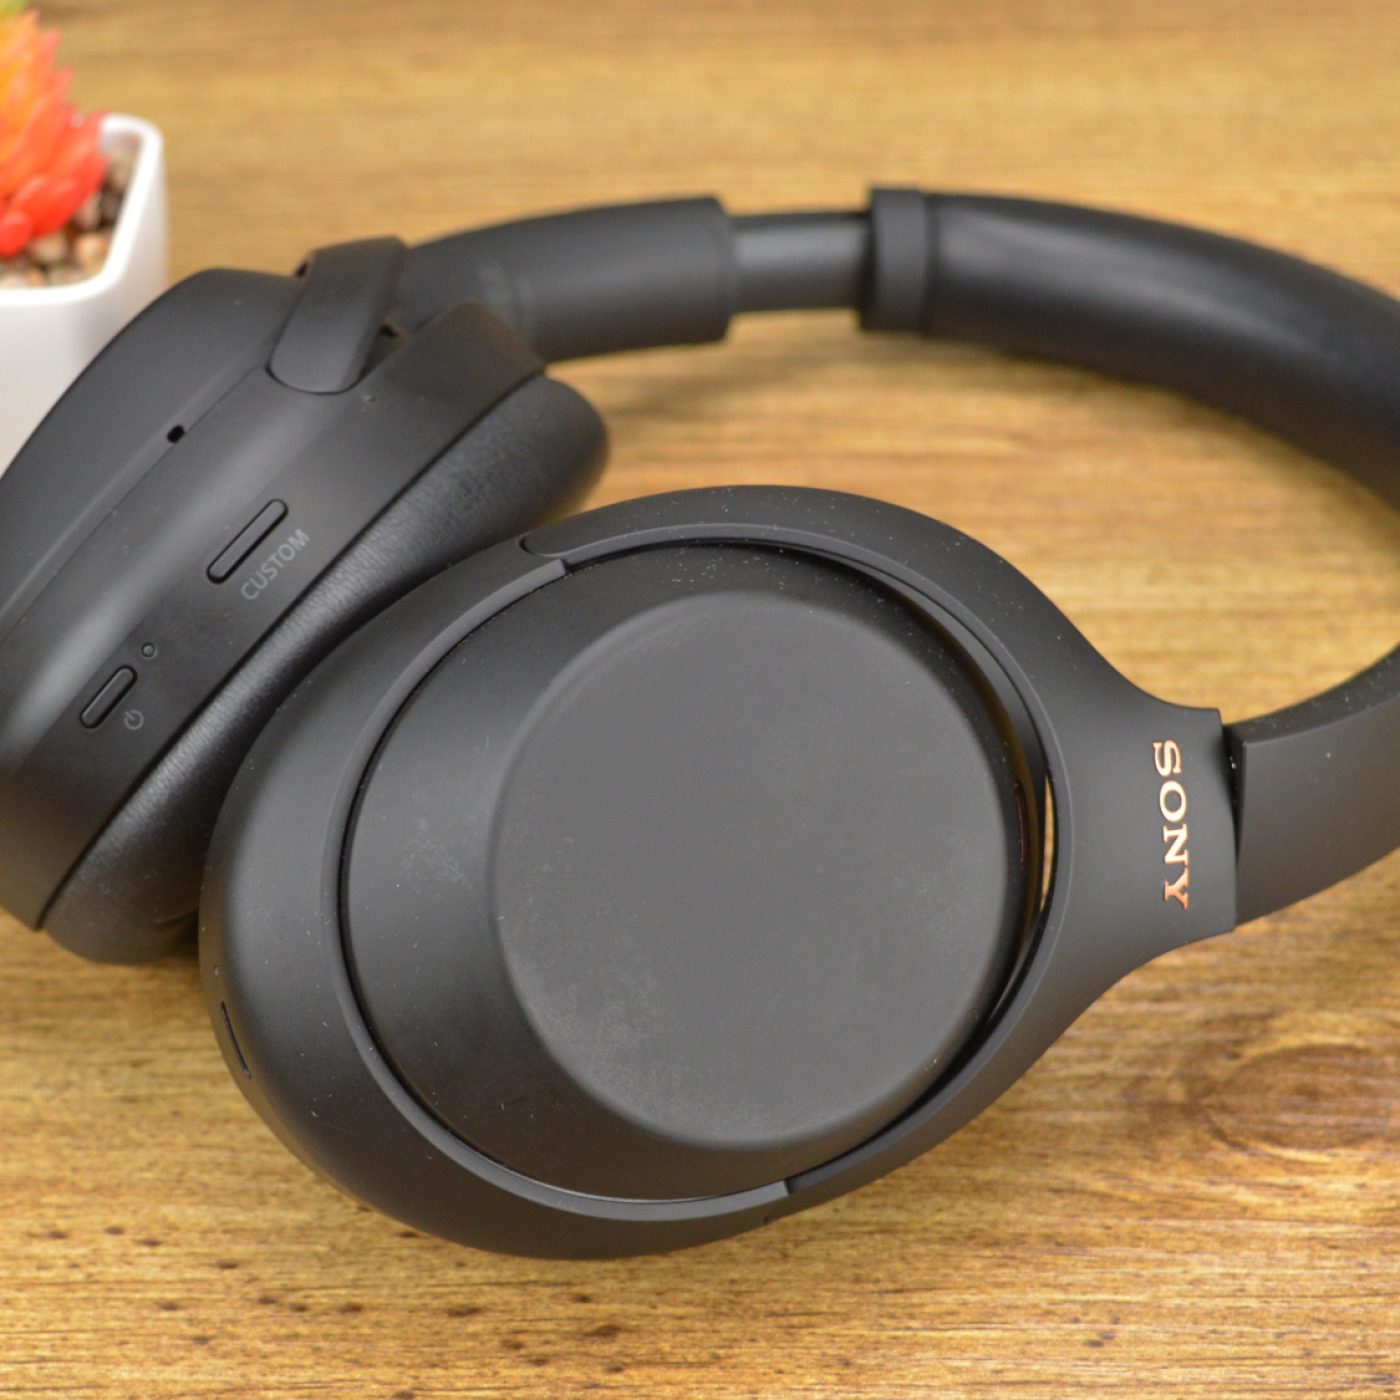 Sony WH-1000XM4 review: The best ANC headphones just got better